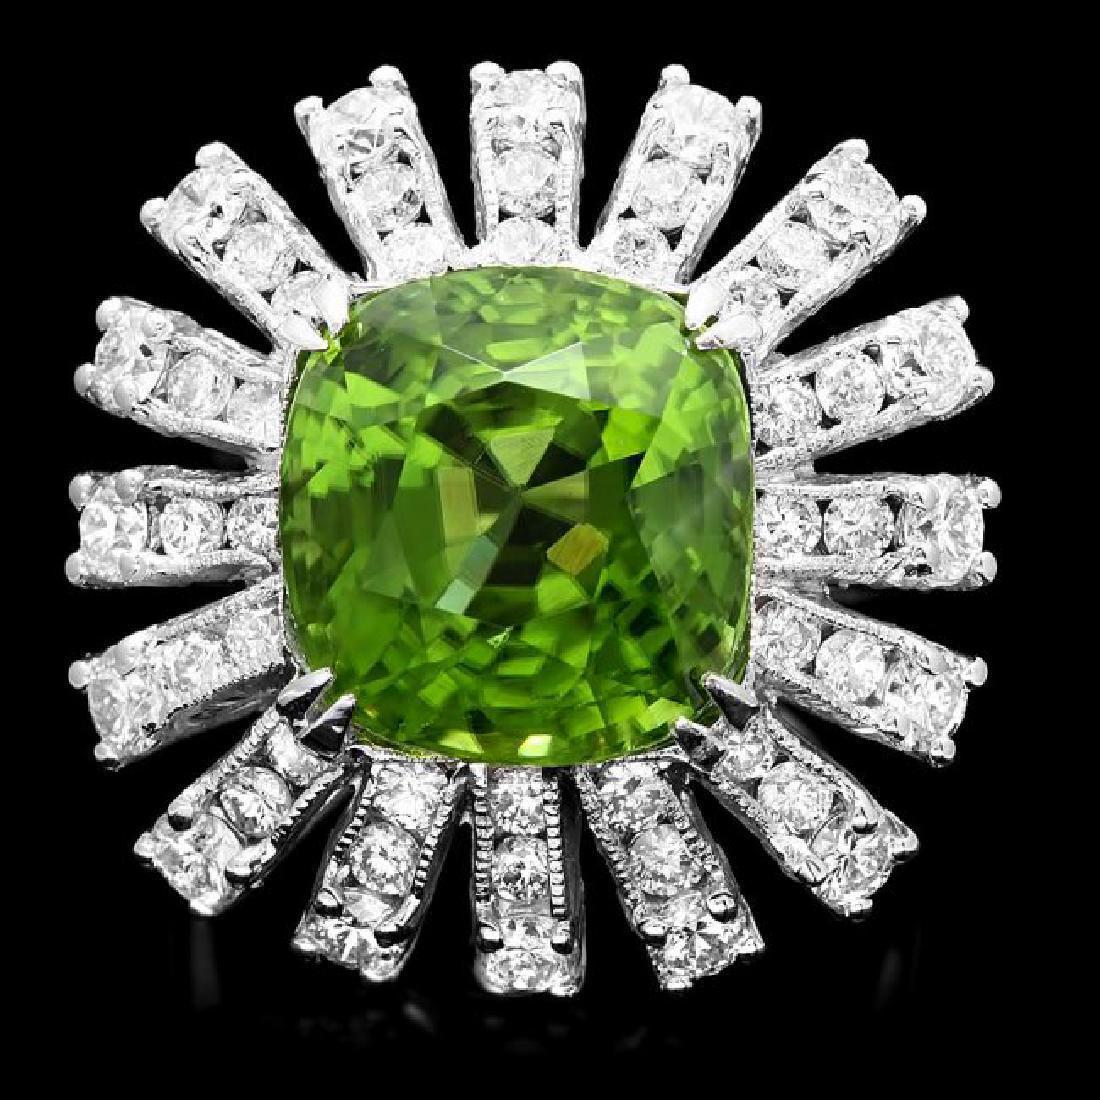 13.10 Carats Natural Very Nice Looking Peridot and Diamond 14K Solid White Gold Ring

Total Natural Cushion Cut Peridot Weight is: Approx. 11.00 Carats

Peridot Measures: Approx. 12.00 x 12.00mm

Natural Round Diamonds Weight: Approx. Approx. 2.10